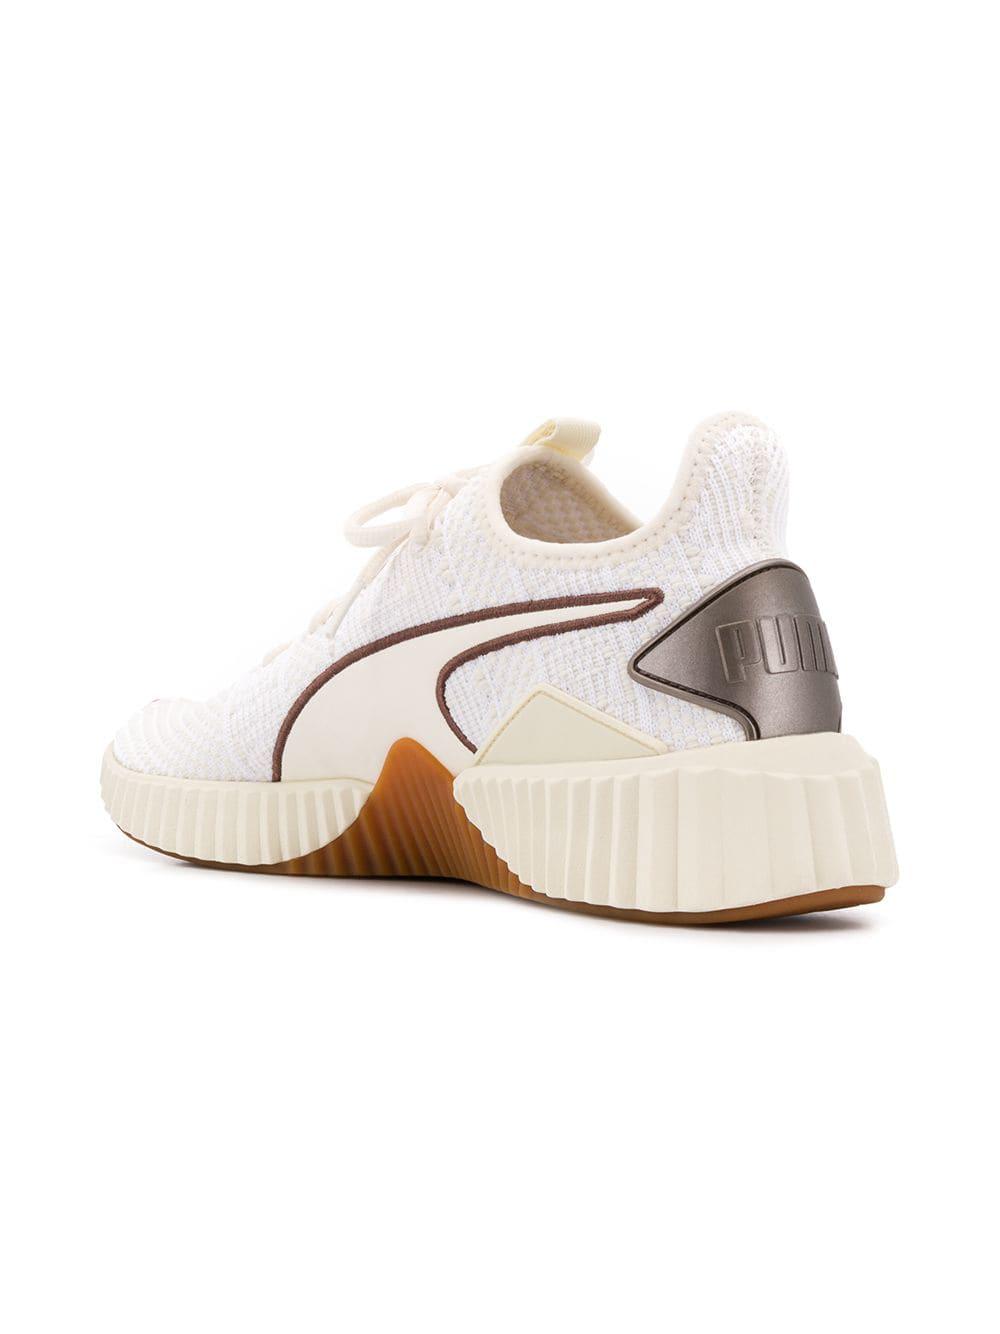 PUMA Synthetic Defy Luxe Wn's Trainers in White | Lyst